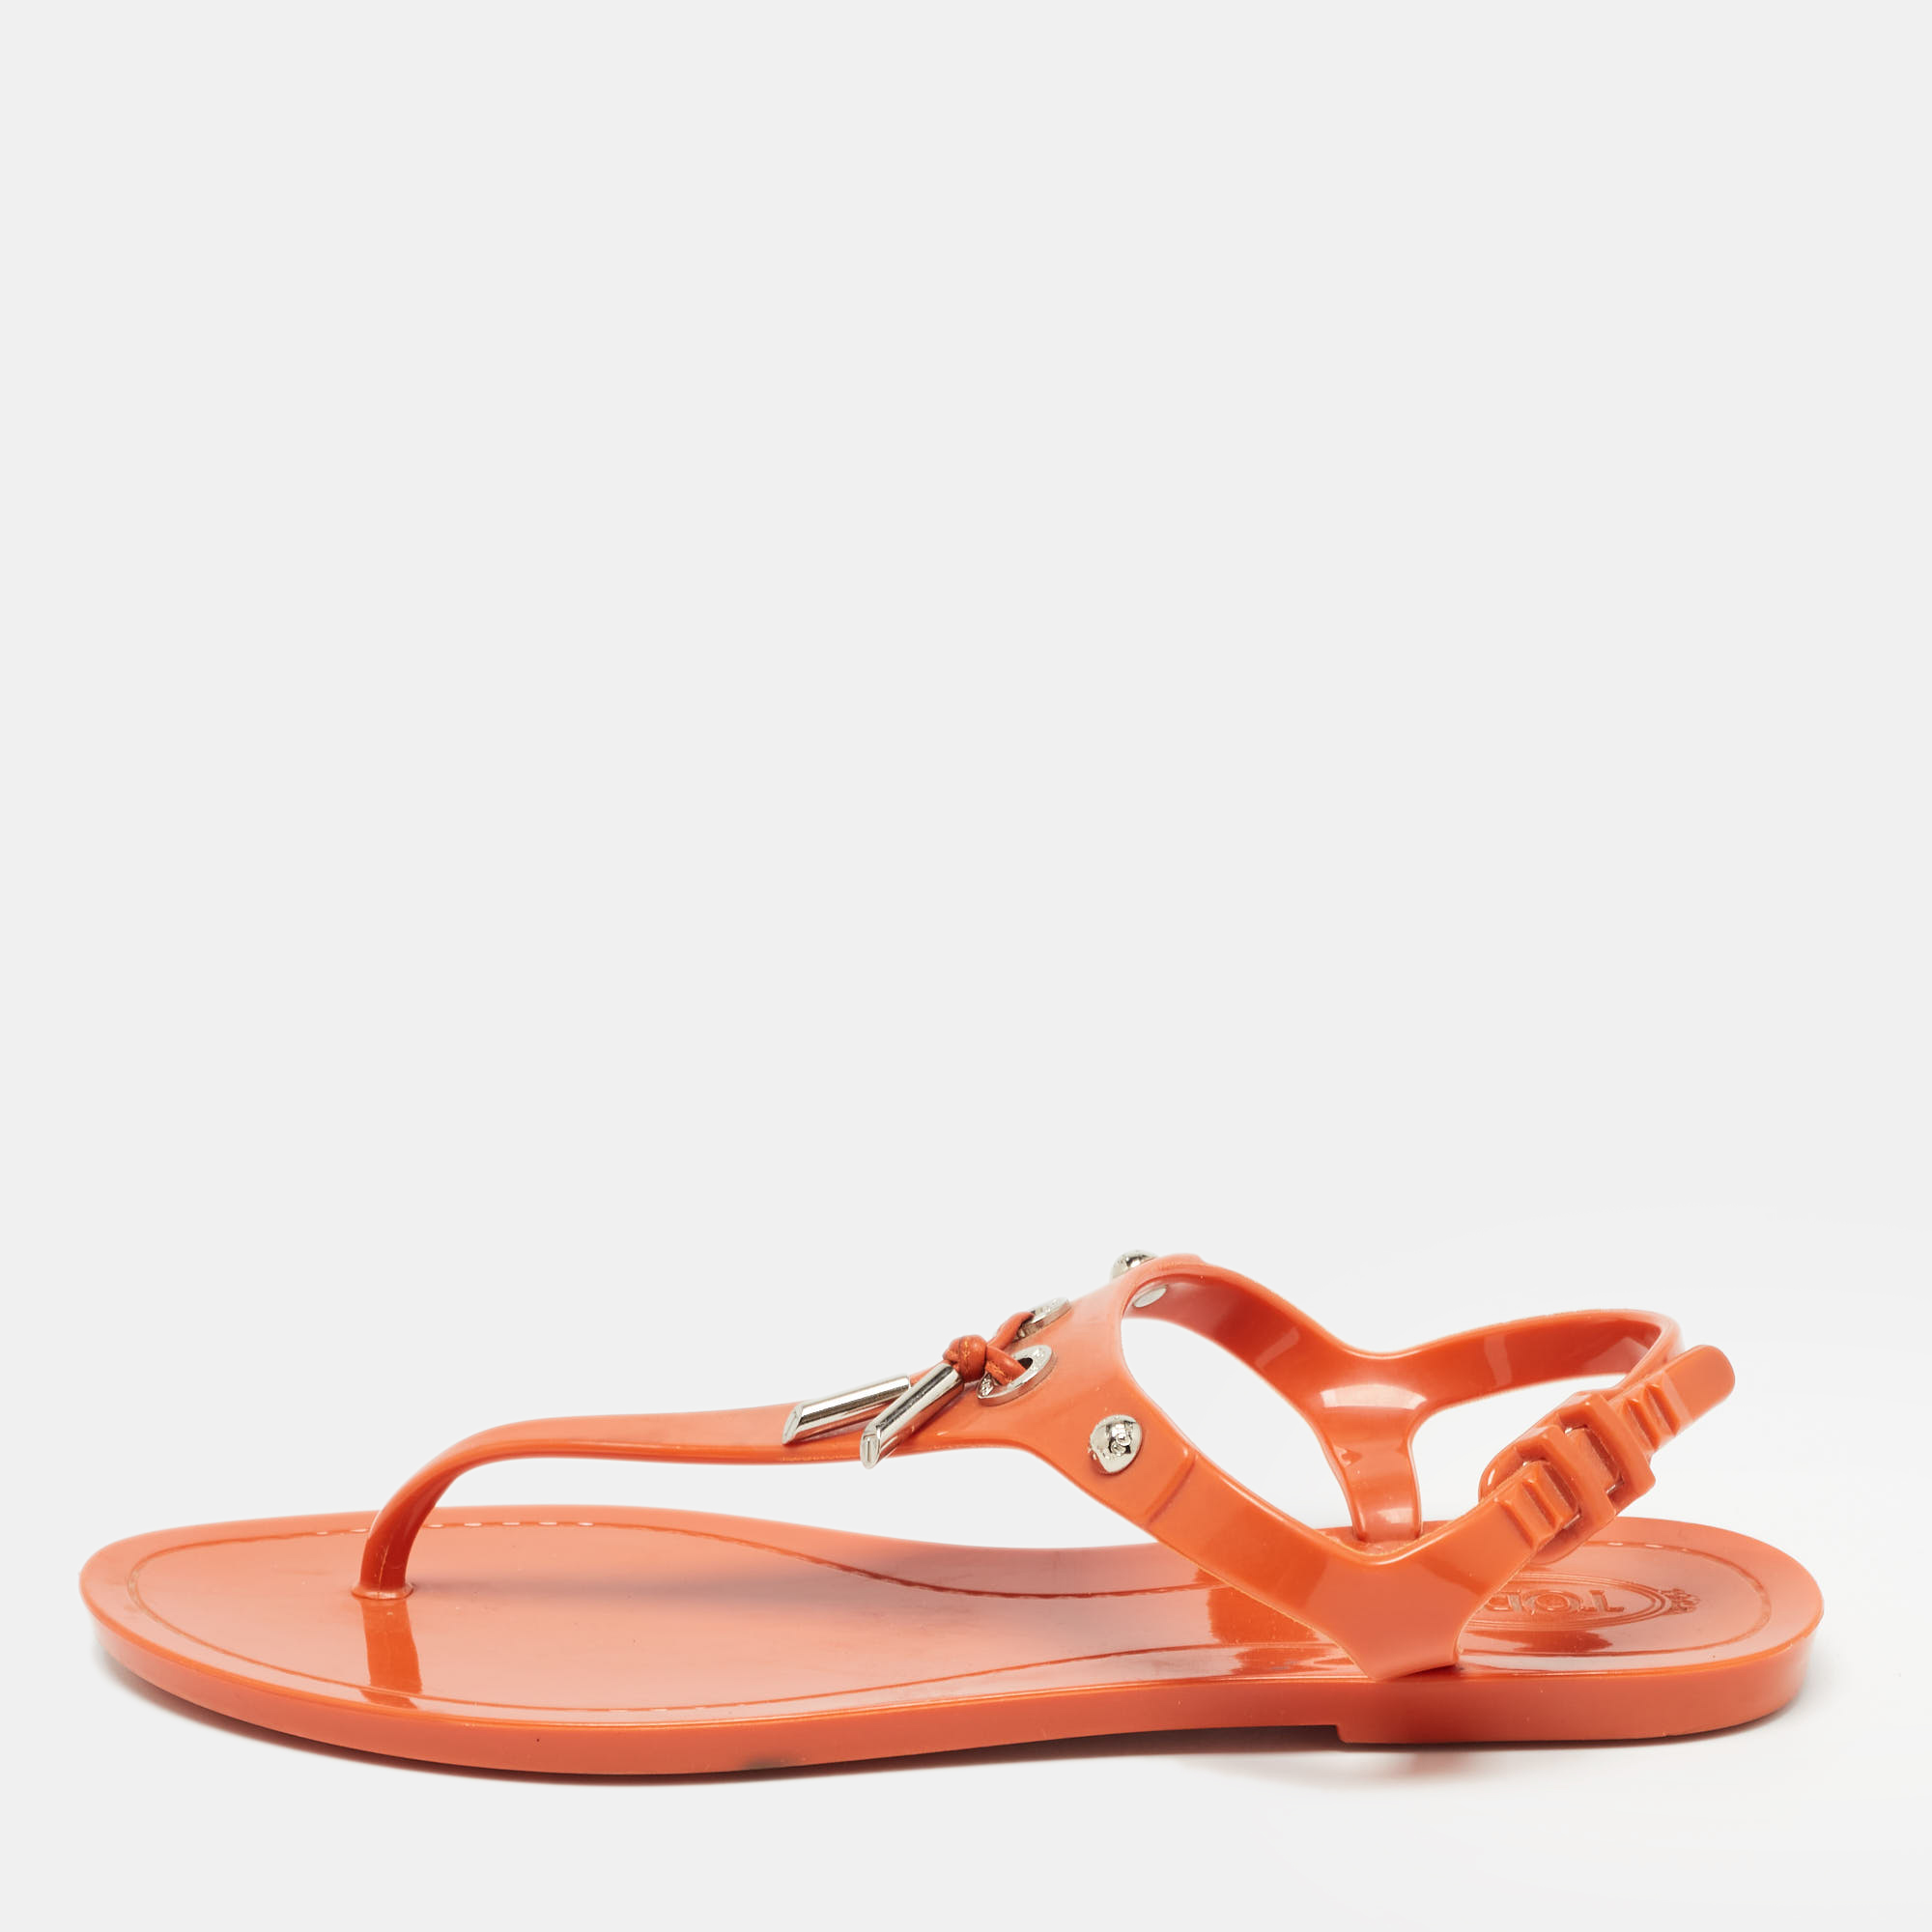 Tod's orange rubber thong flat sandals size 38